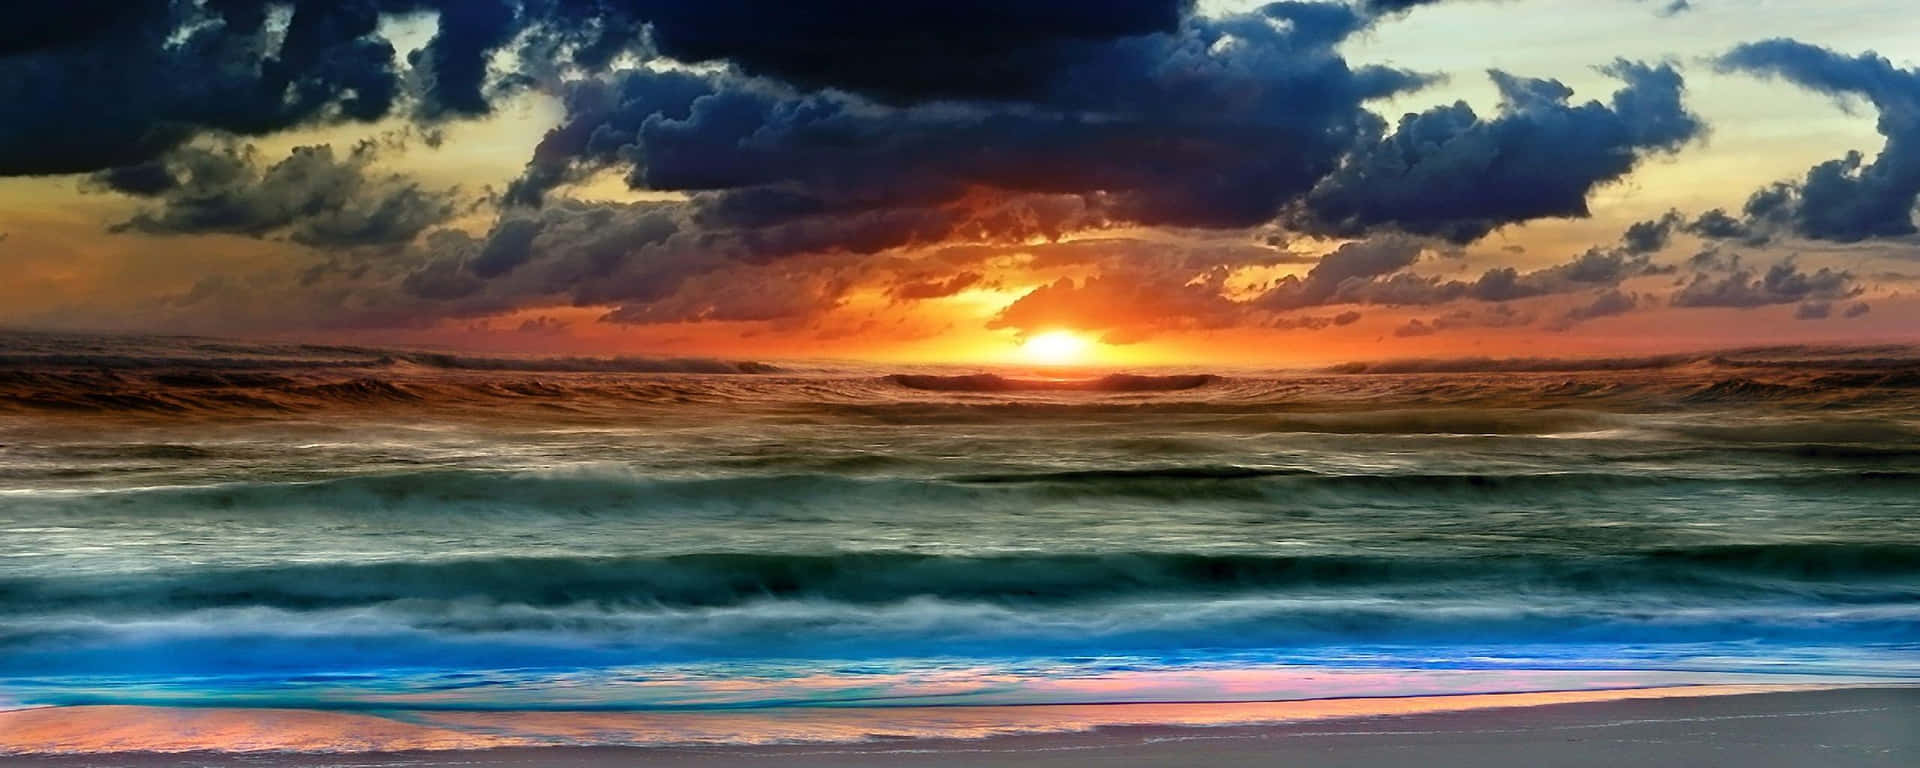 A Painting Of A Sunset Over The Ocean